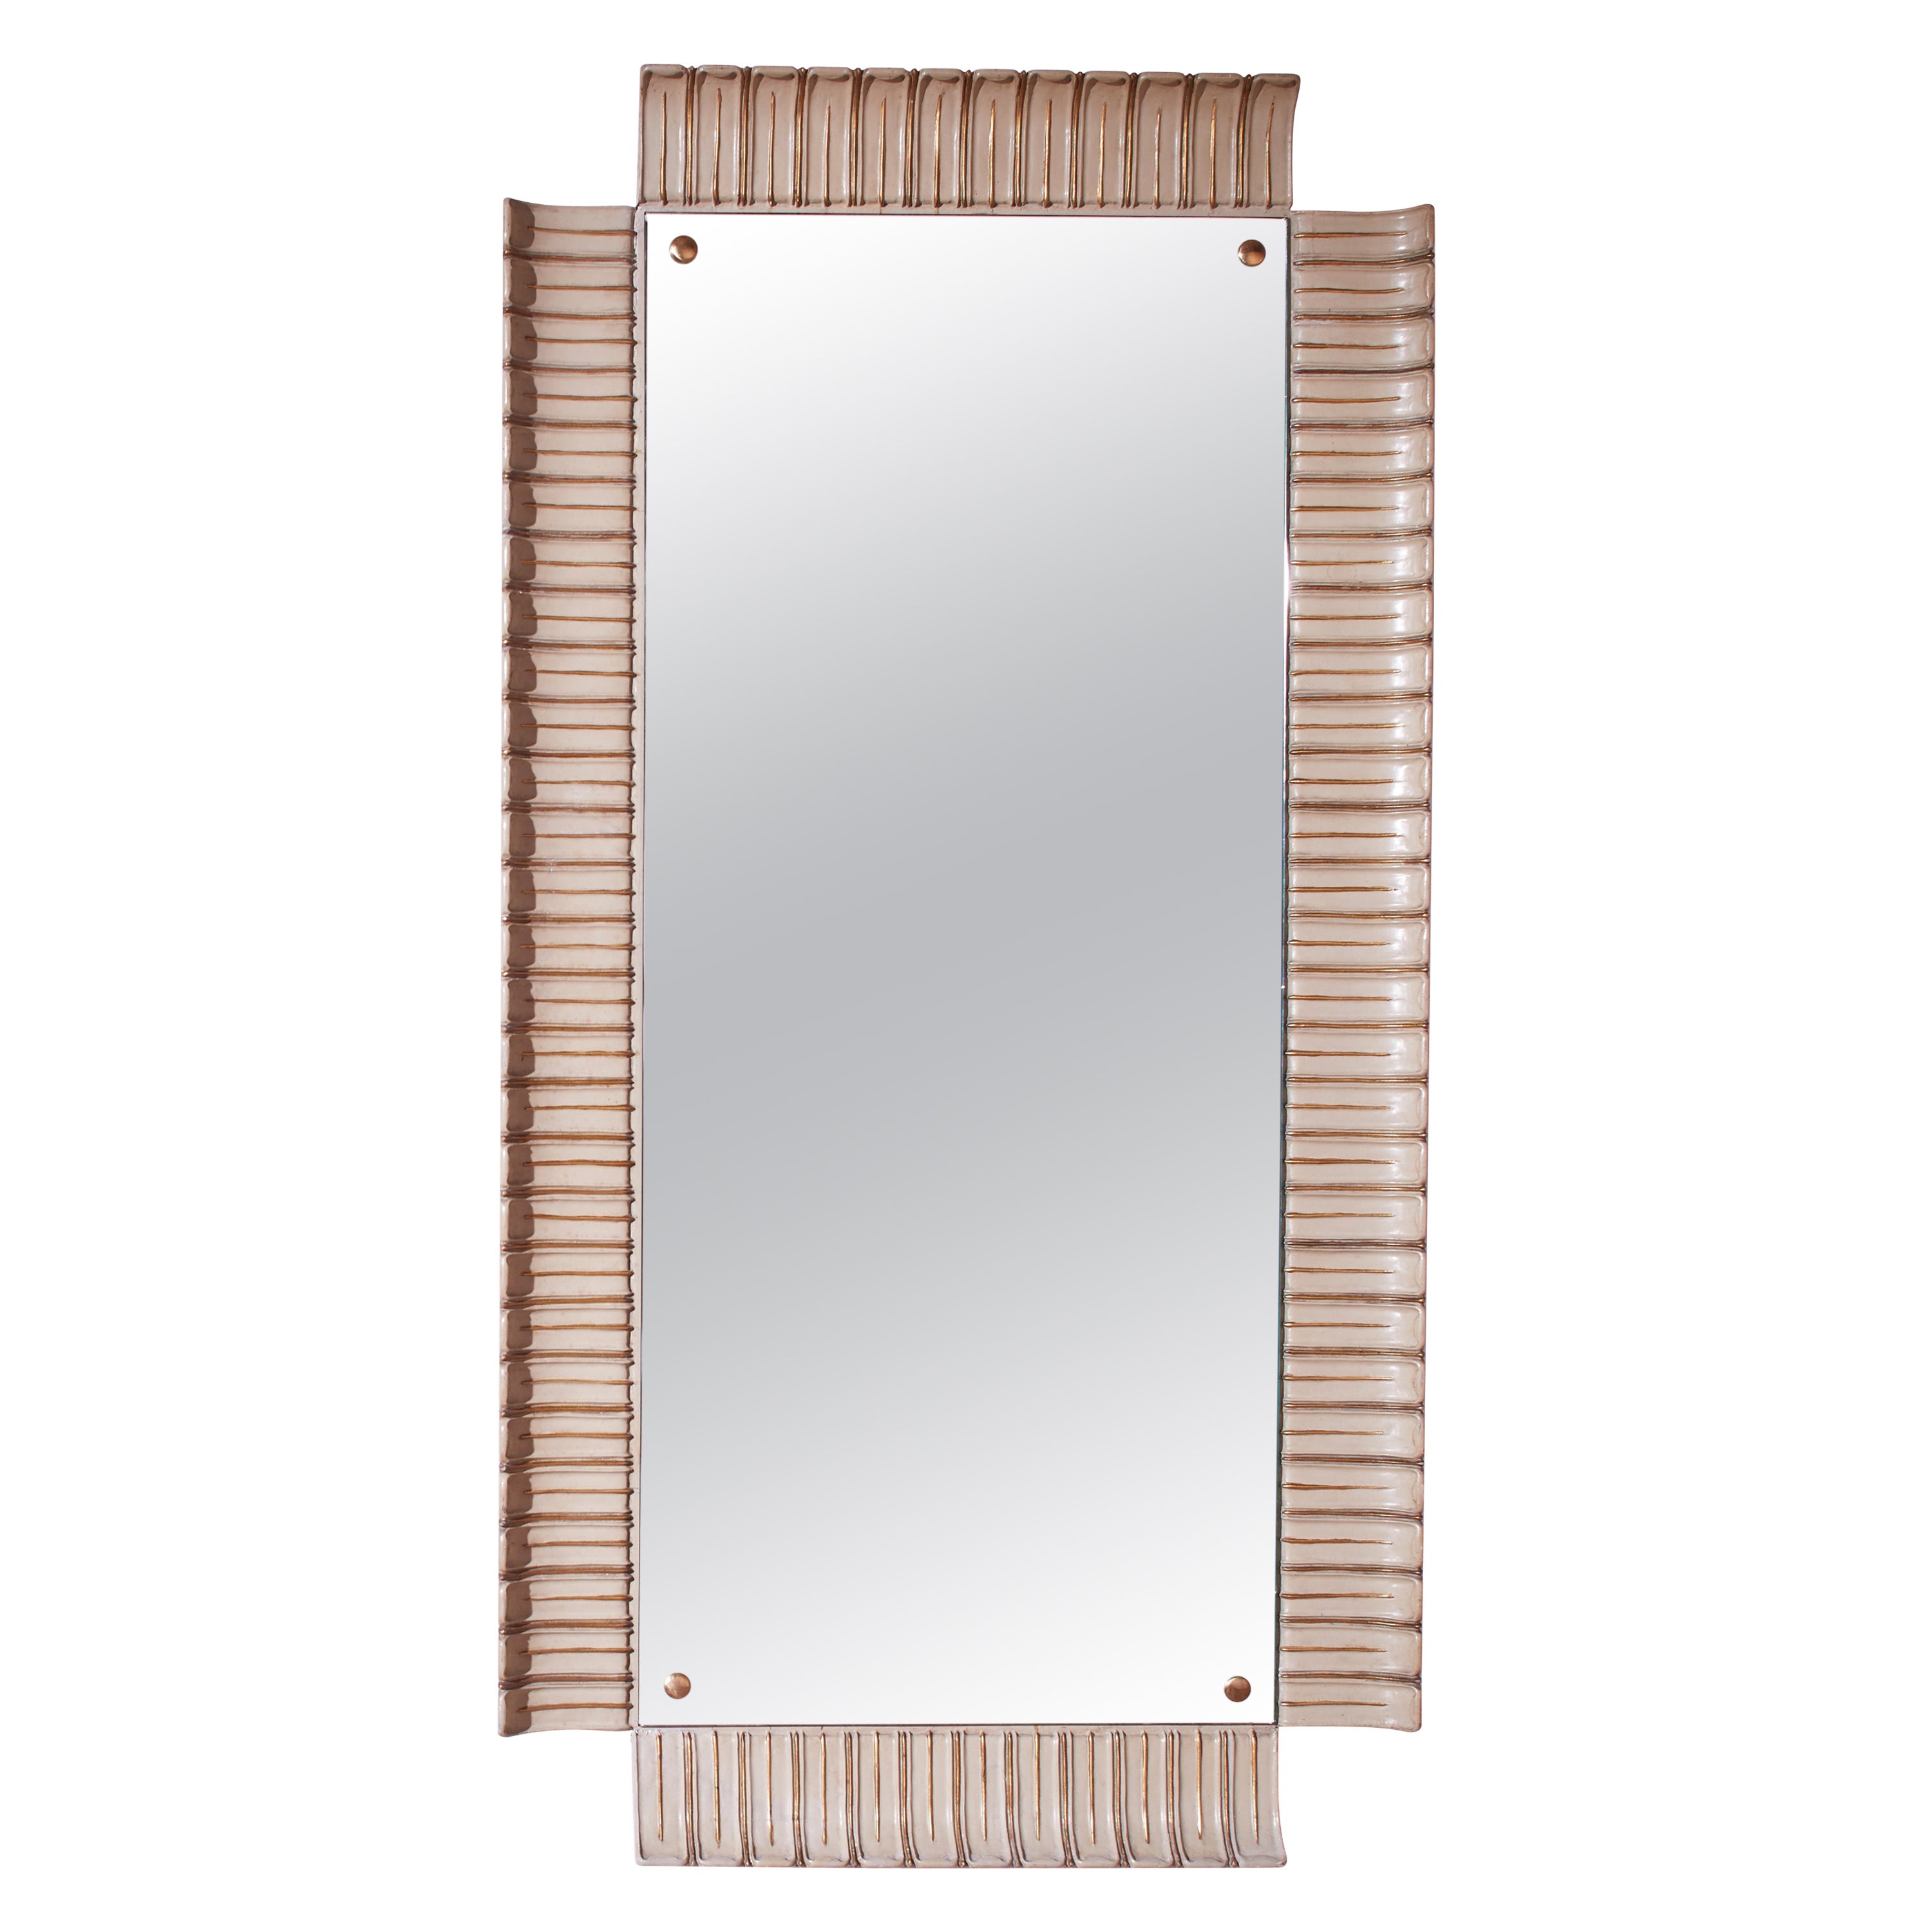 Paolo Buffa wooden lacquered mirror, Italy, 1940s For Sale